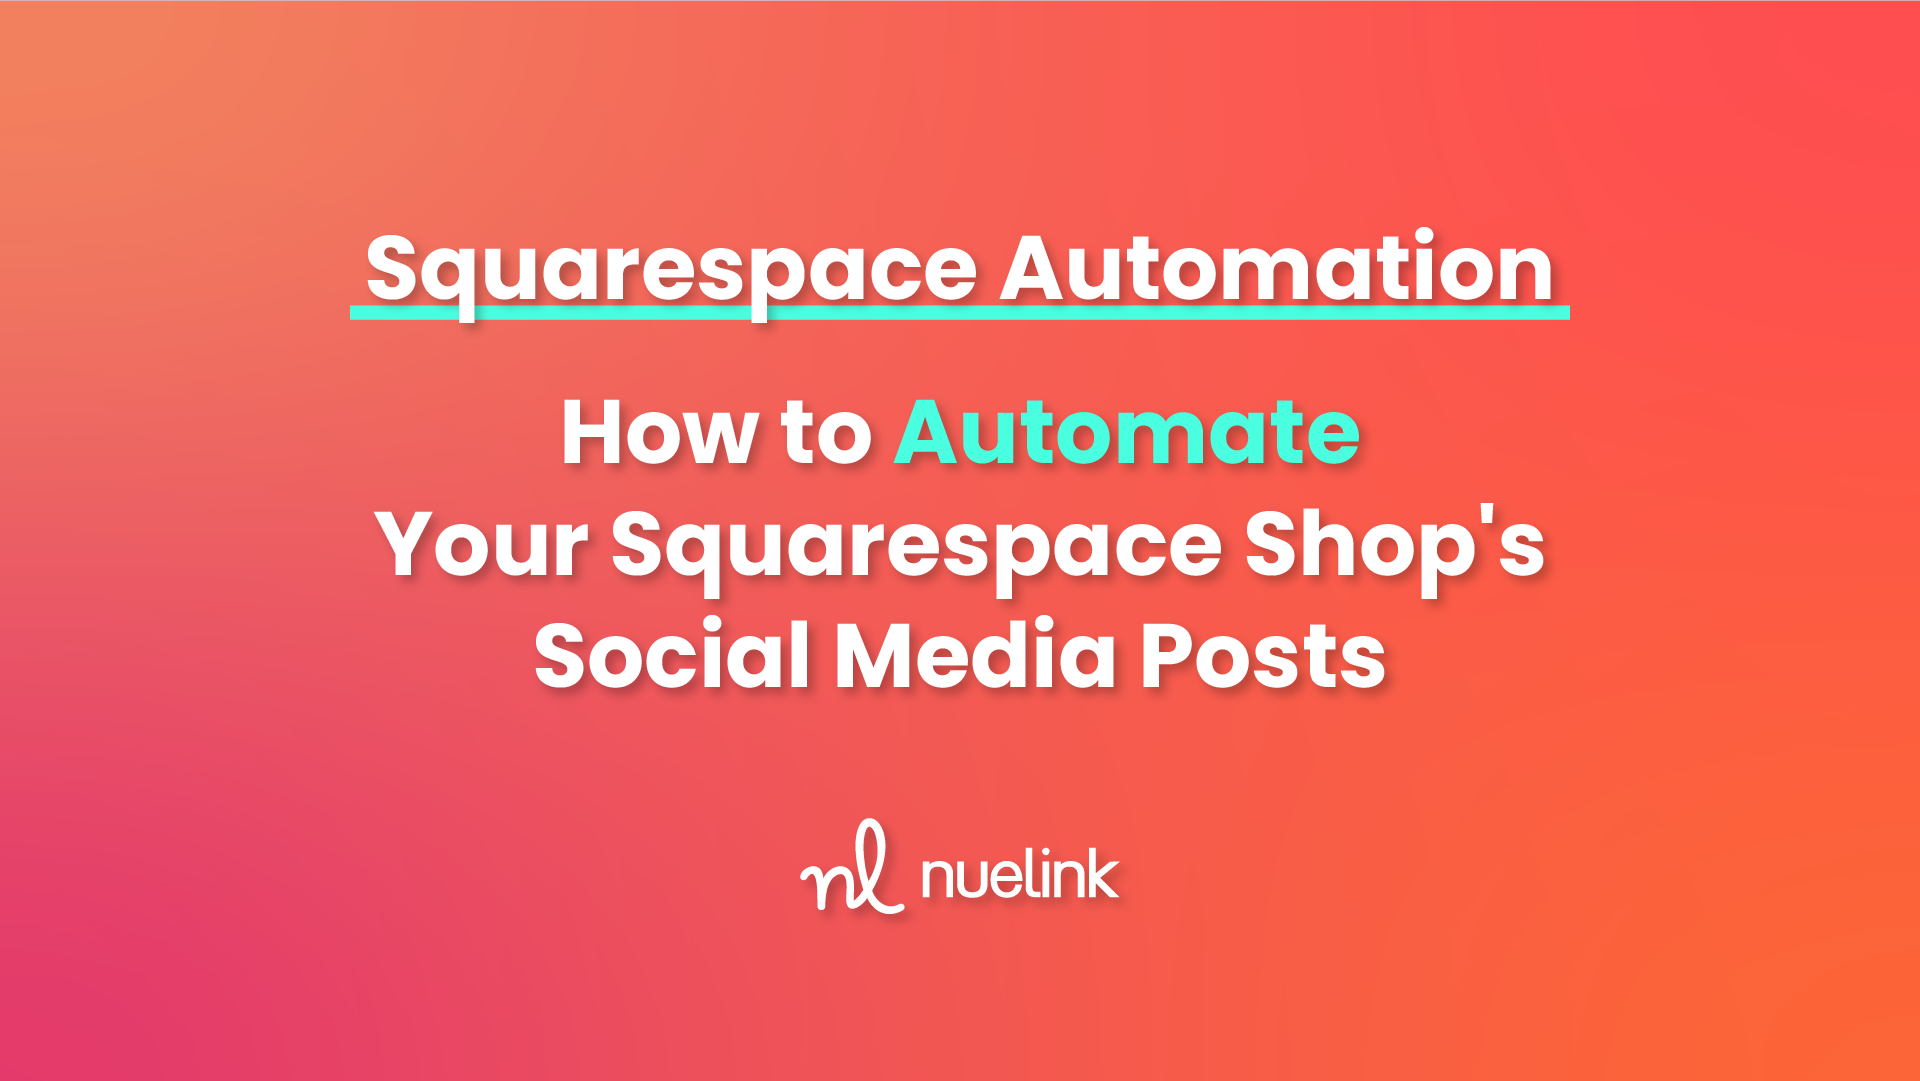 Squarespace Automation How To Automate Your Squarespace Shop S Social Media Posts